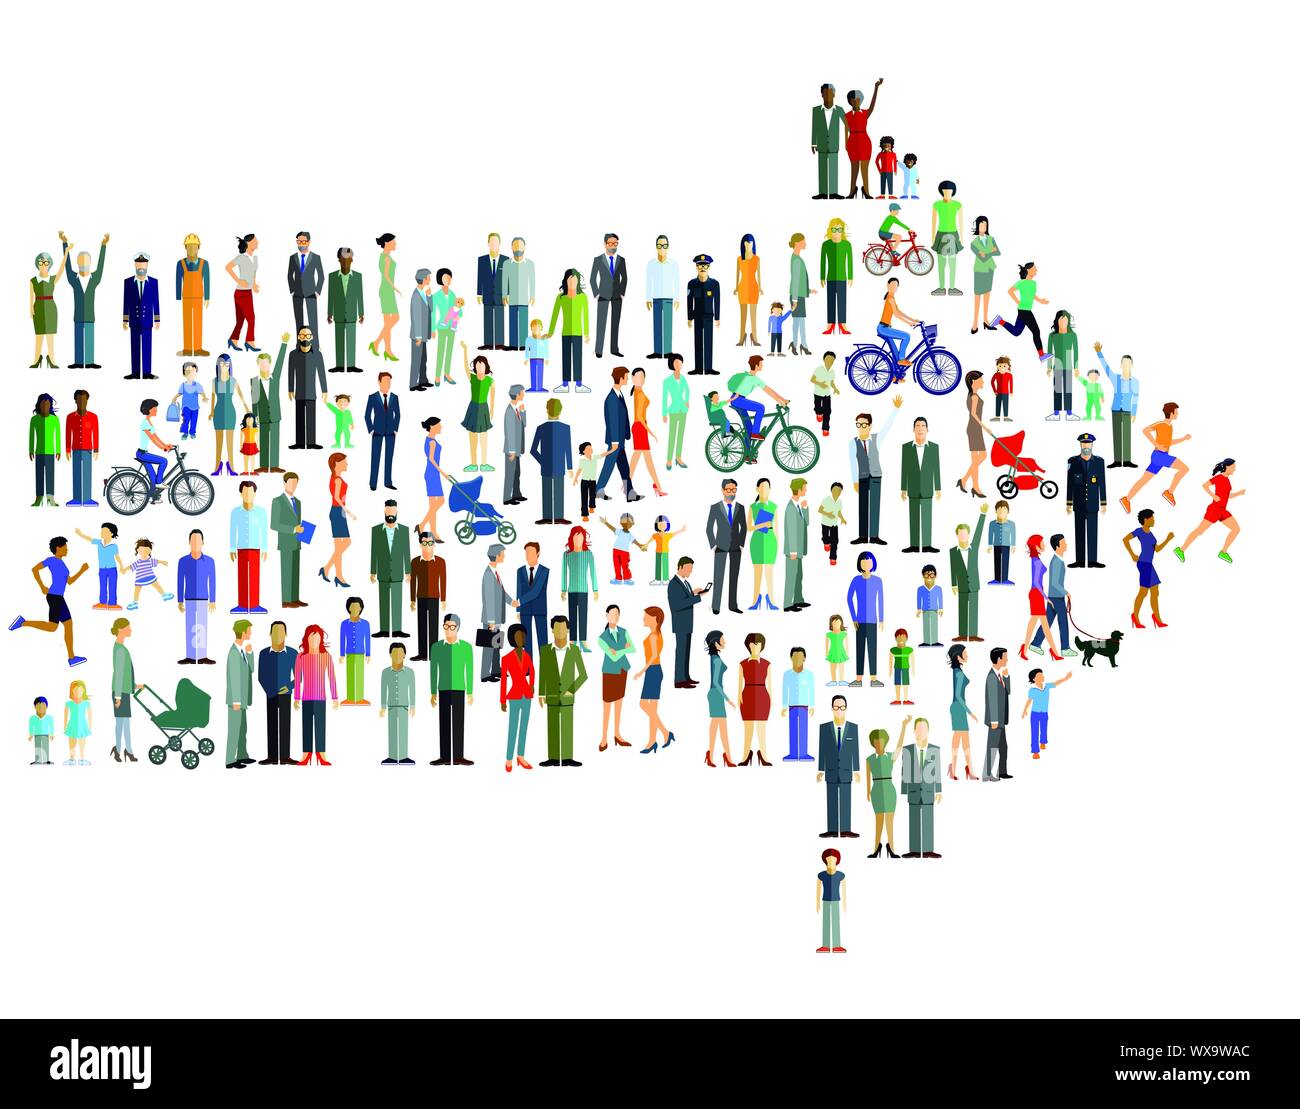 Unity in diversity Cut Out Stock Images & Pictures - Alamy